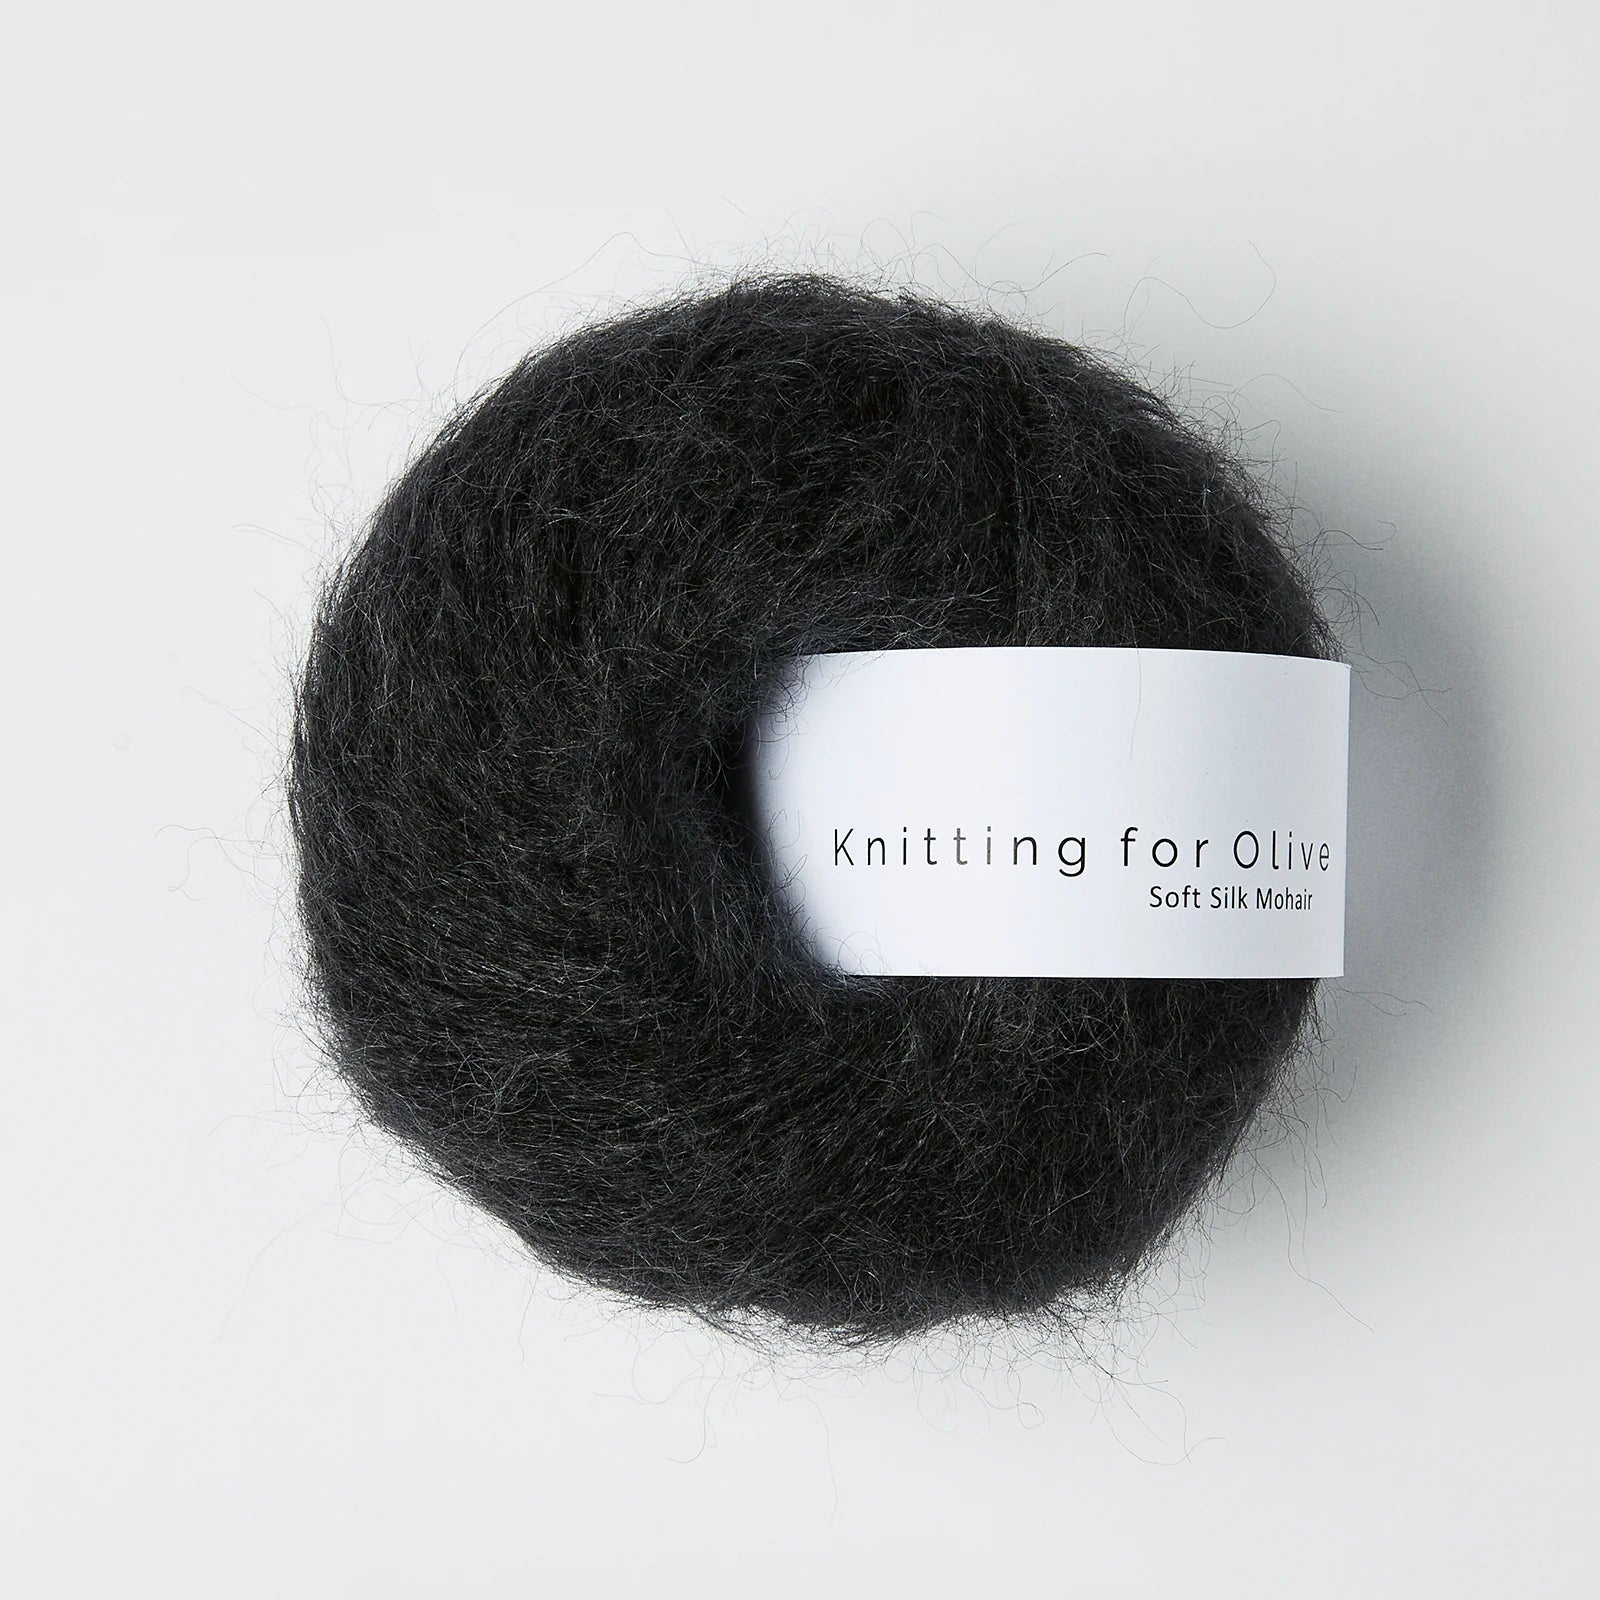 Knitting for Olive Soft Silk Mohair - Knitting for Olive - Licorice - The Little Yarn Store